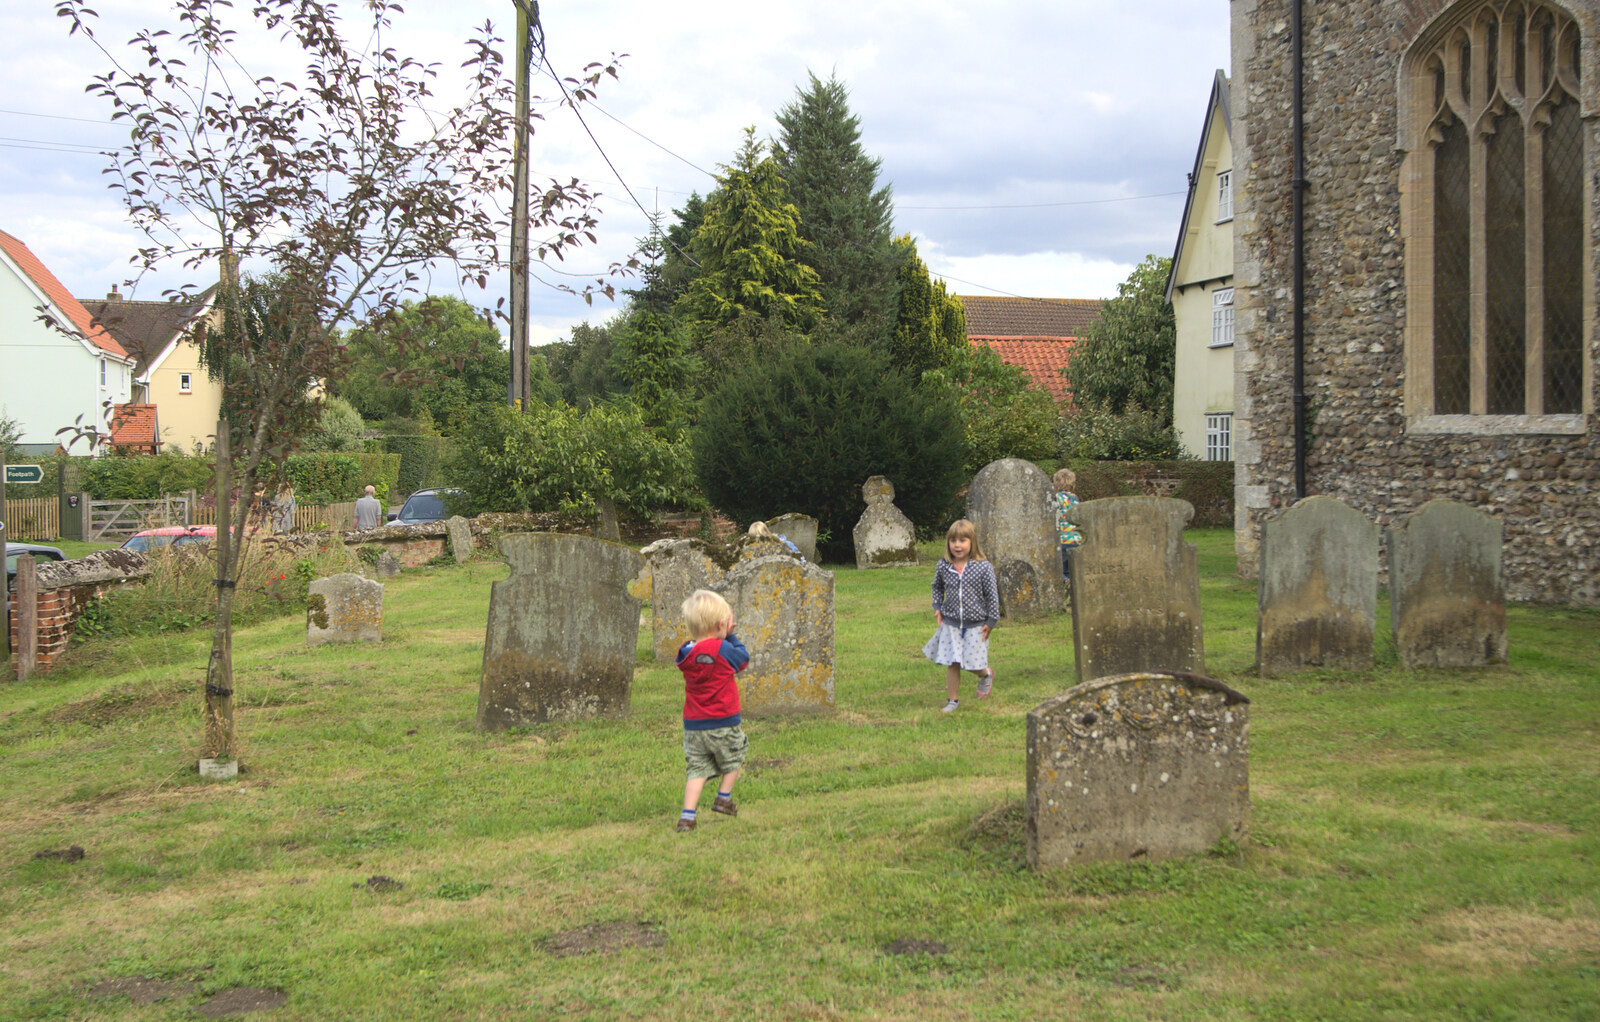 Harry and Sophie in the churchyard from The Oaksmere, and the Gislingham Flower Festival, Suffolk - 24th August 2014